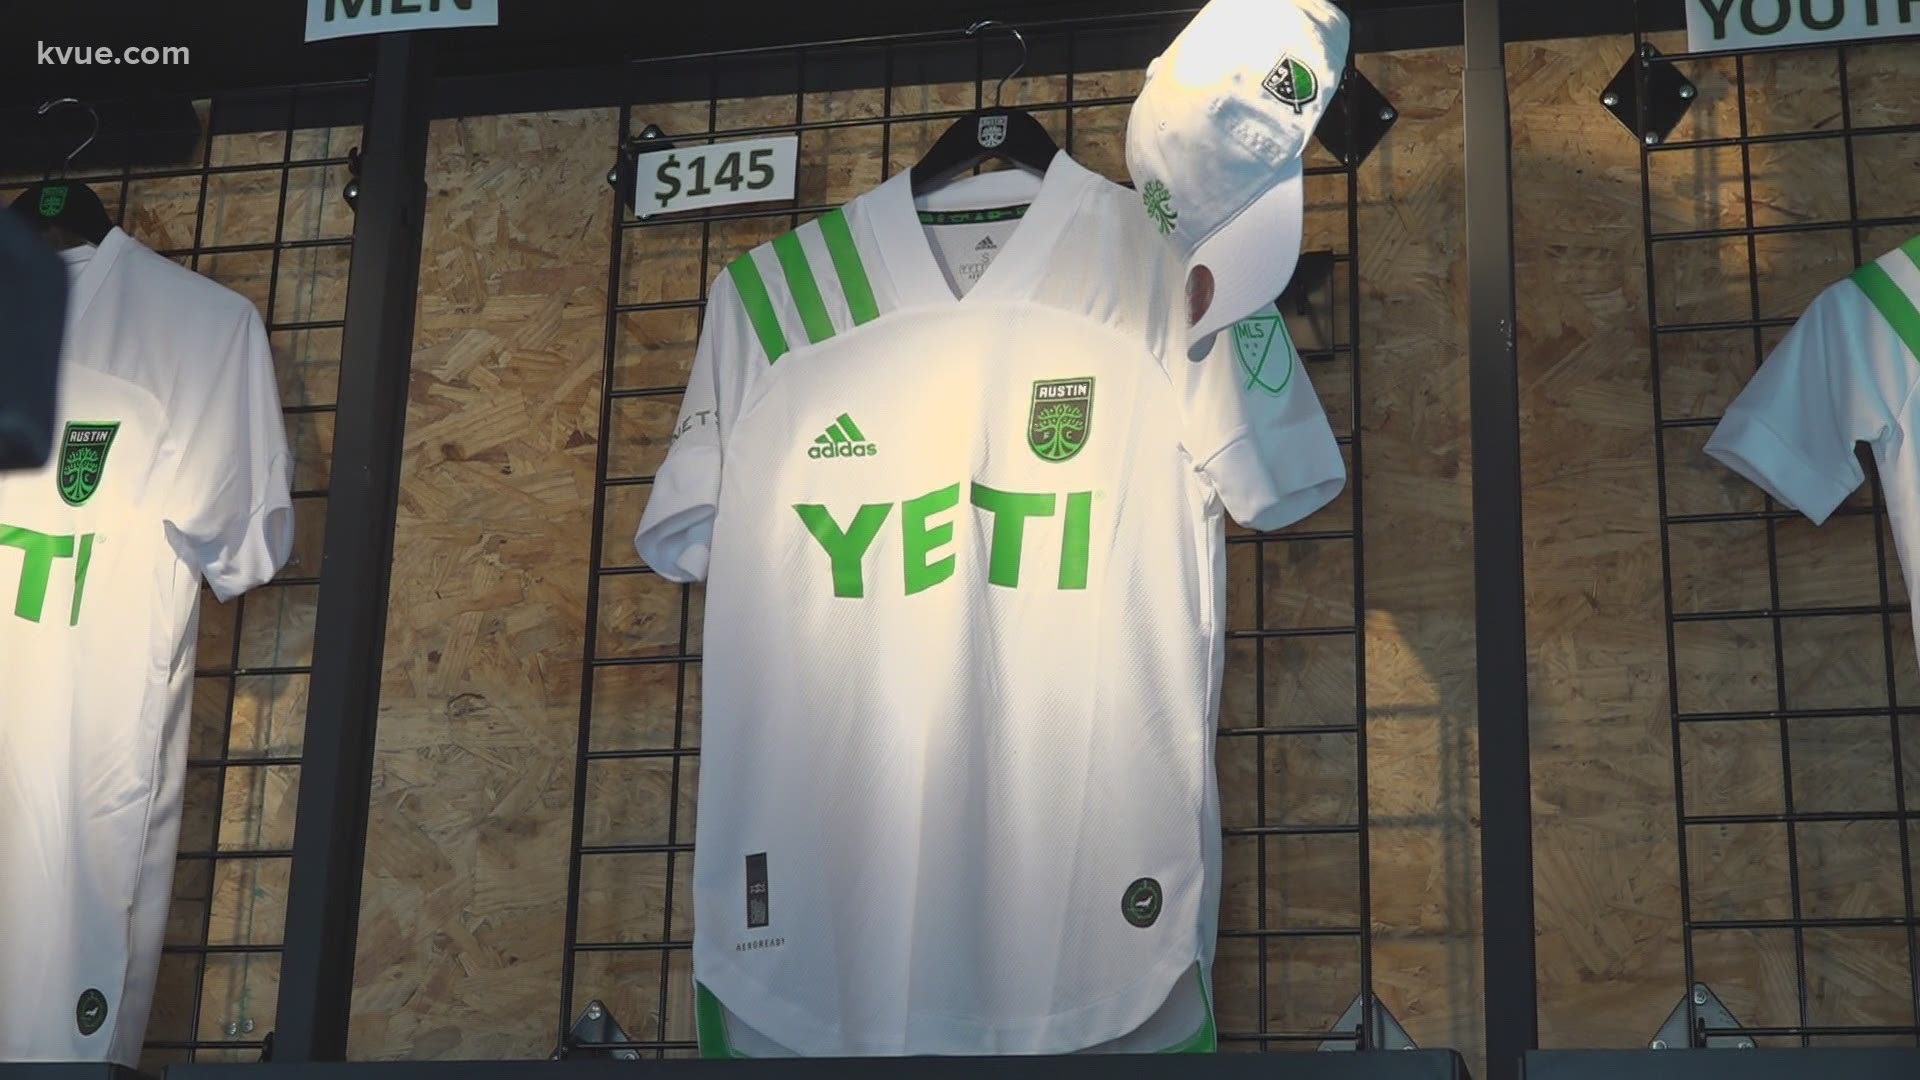 The details of the jersey were designed by the team's supporters, which include things important to the city of Austin.